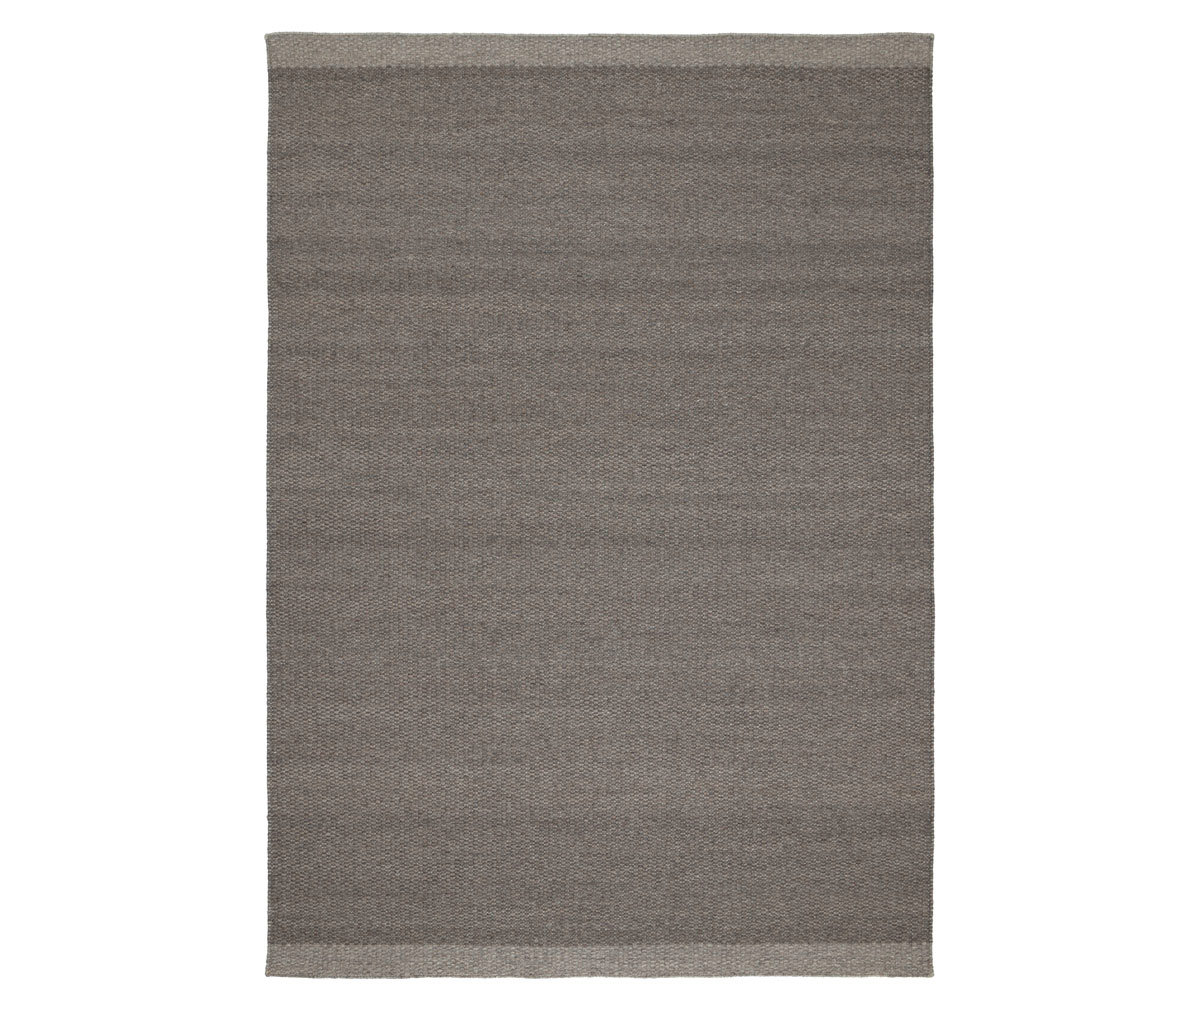 Linie Design Frode Rug Charcoal, 140 x 200 cm